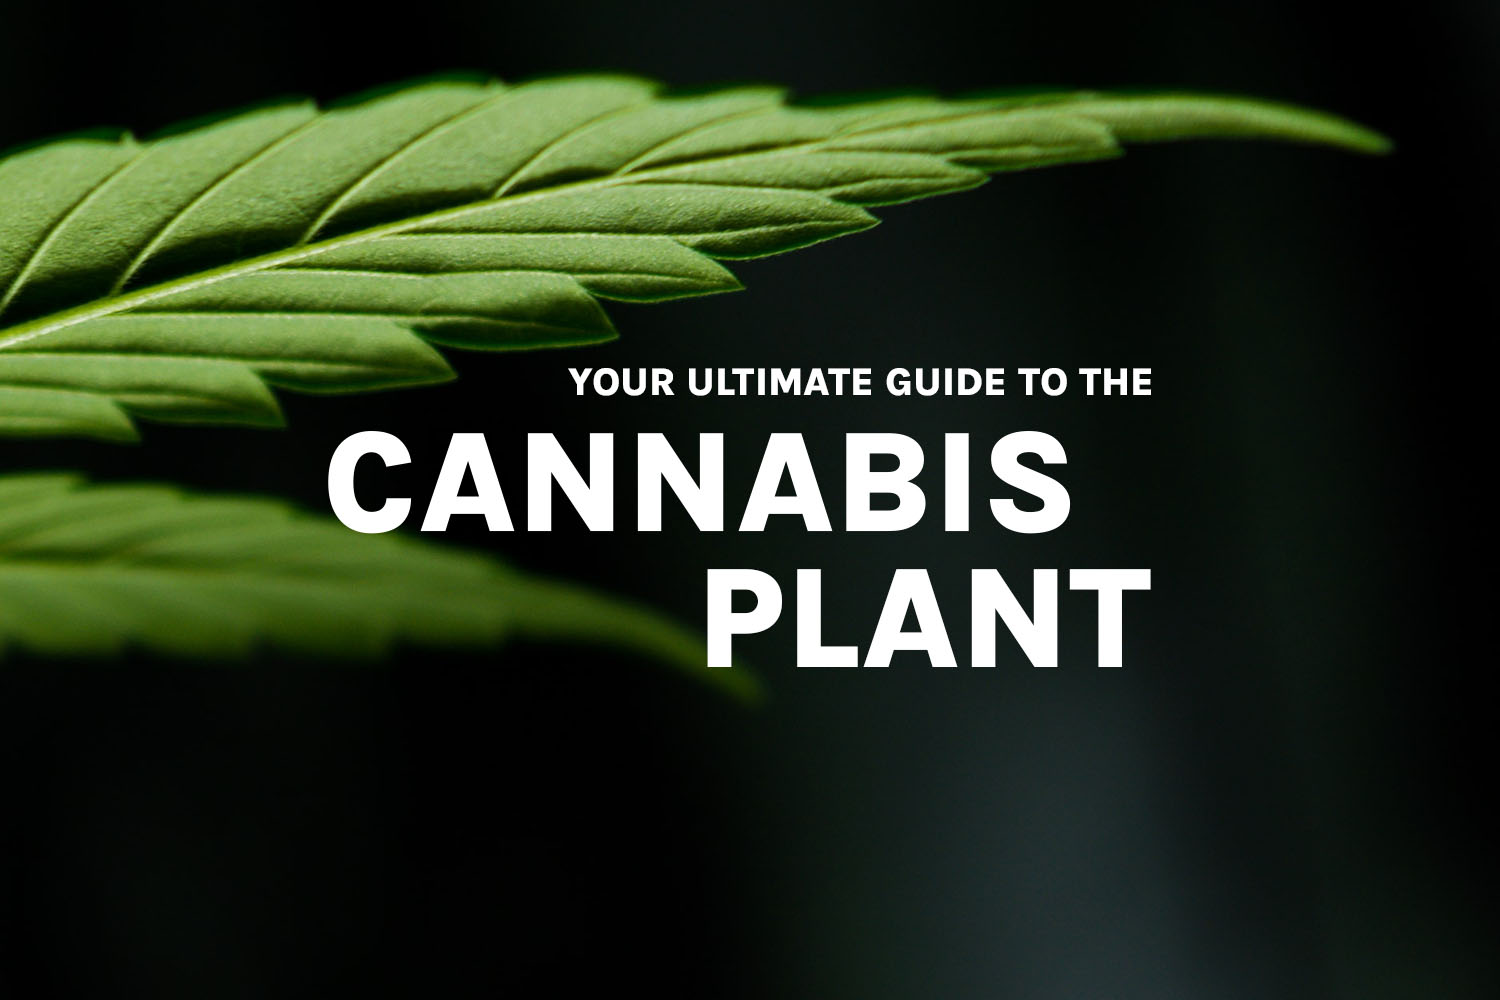 Featured post image of Your Ultimate Guide to the Cannabis Plant